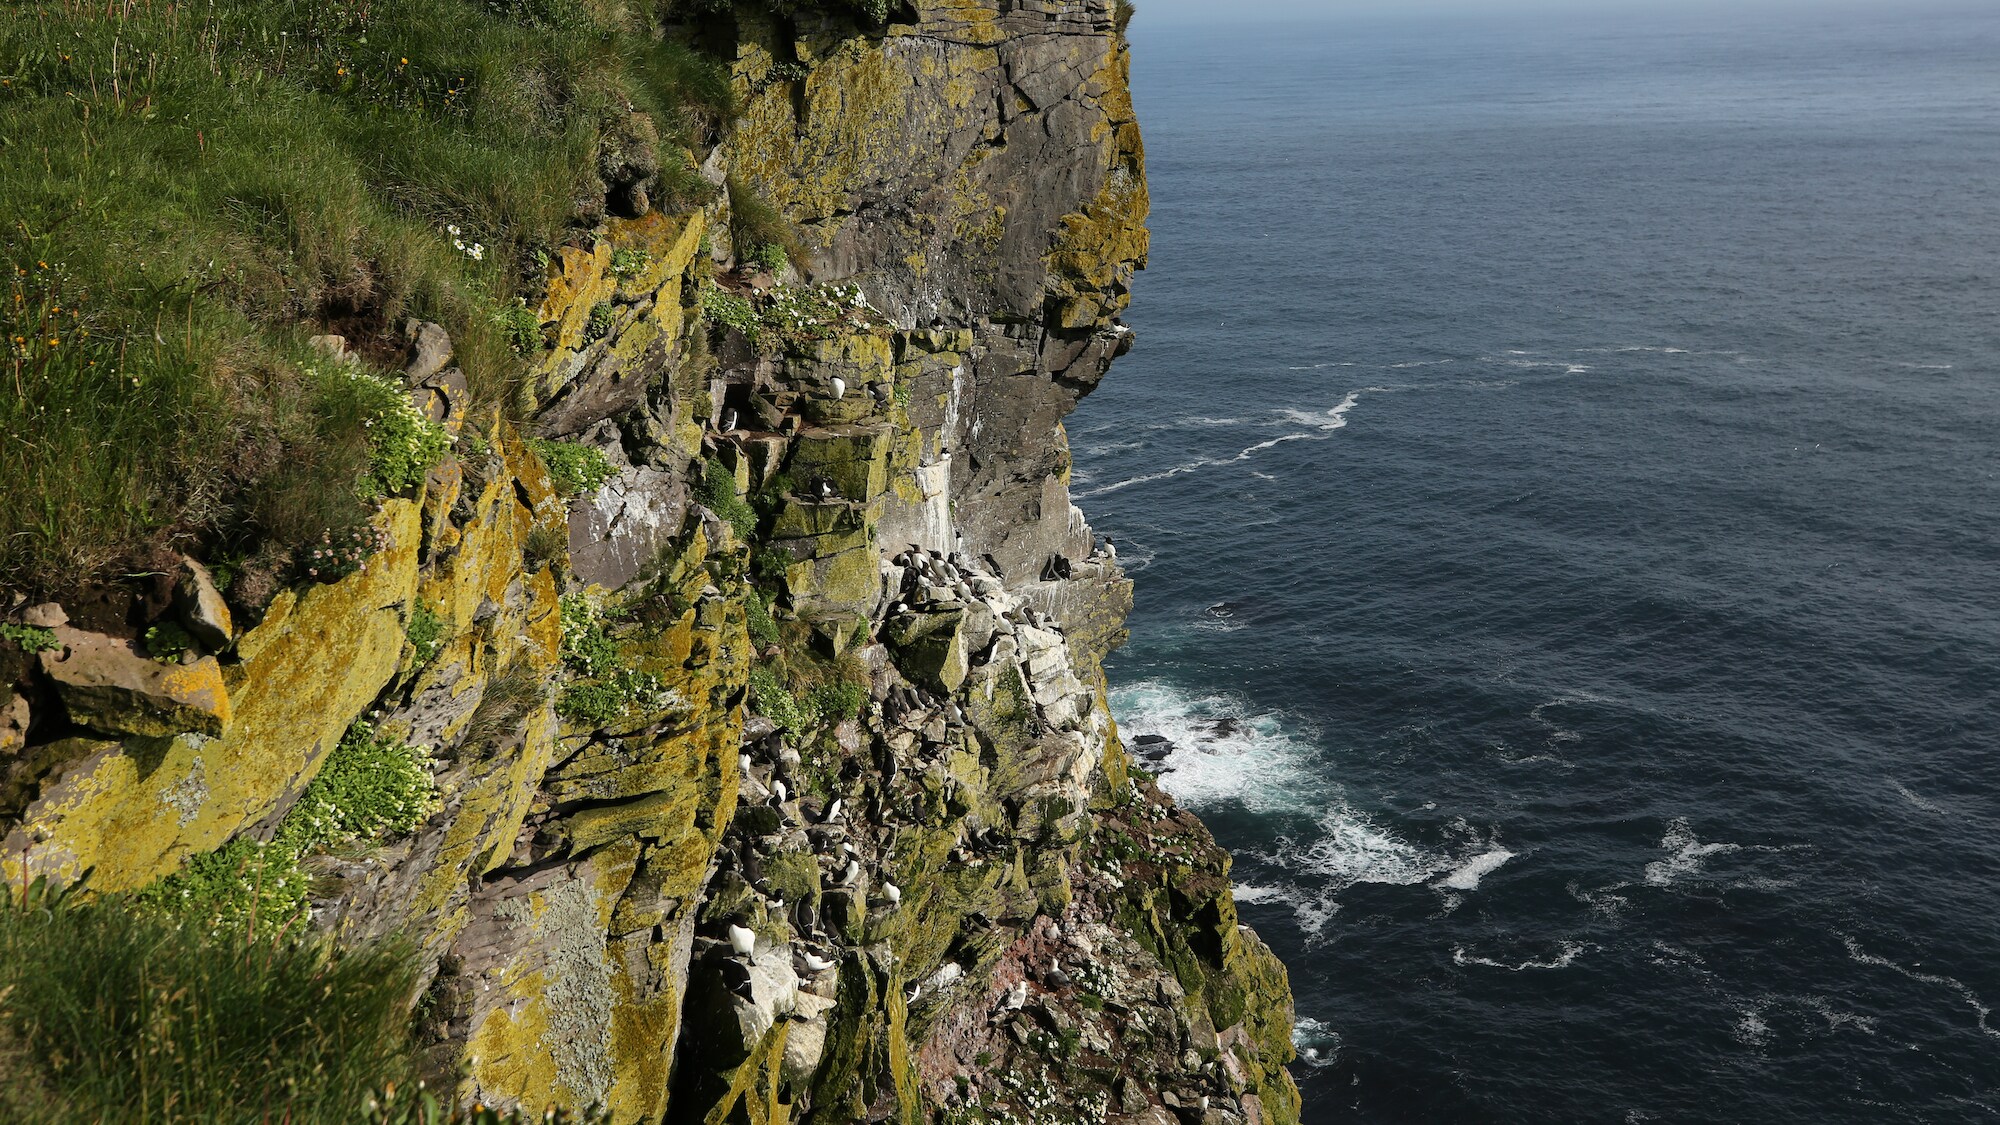 Cliff face with guillemots nests. (National Geographic for Disney+/Jonjo Harrington)